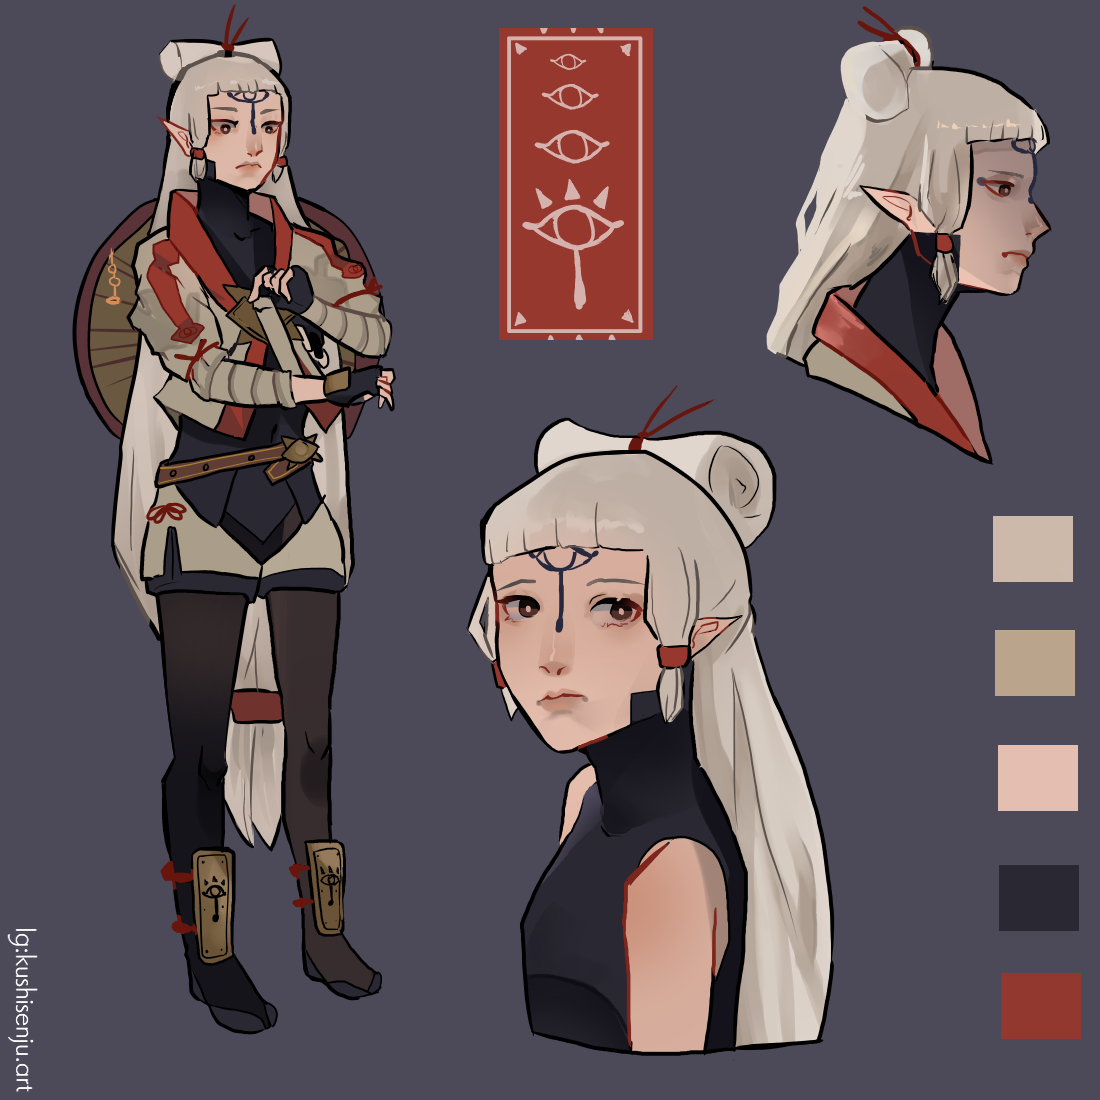 Impa's design from the new Age of Calamity is